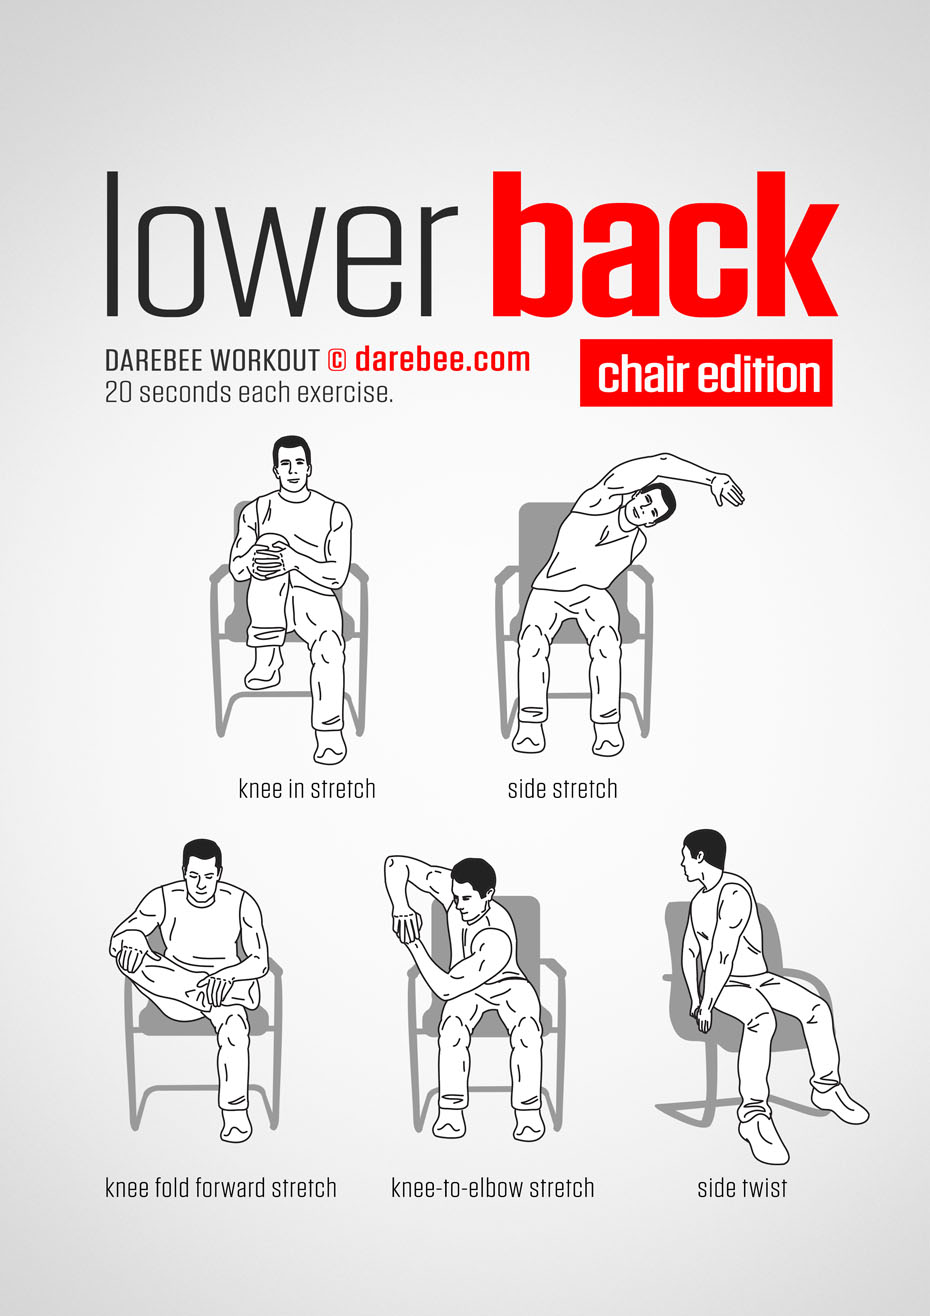 Best exercises to strengthen your lower back - Best exercises for